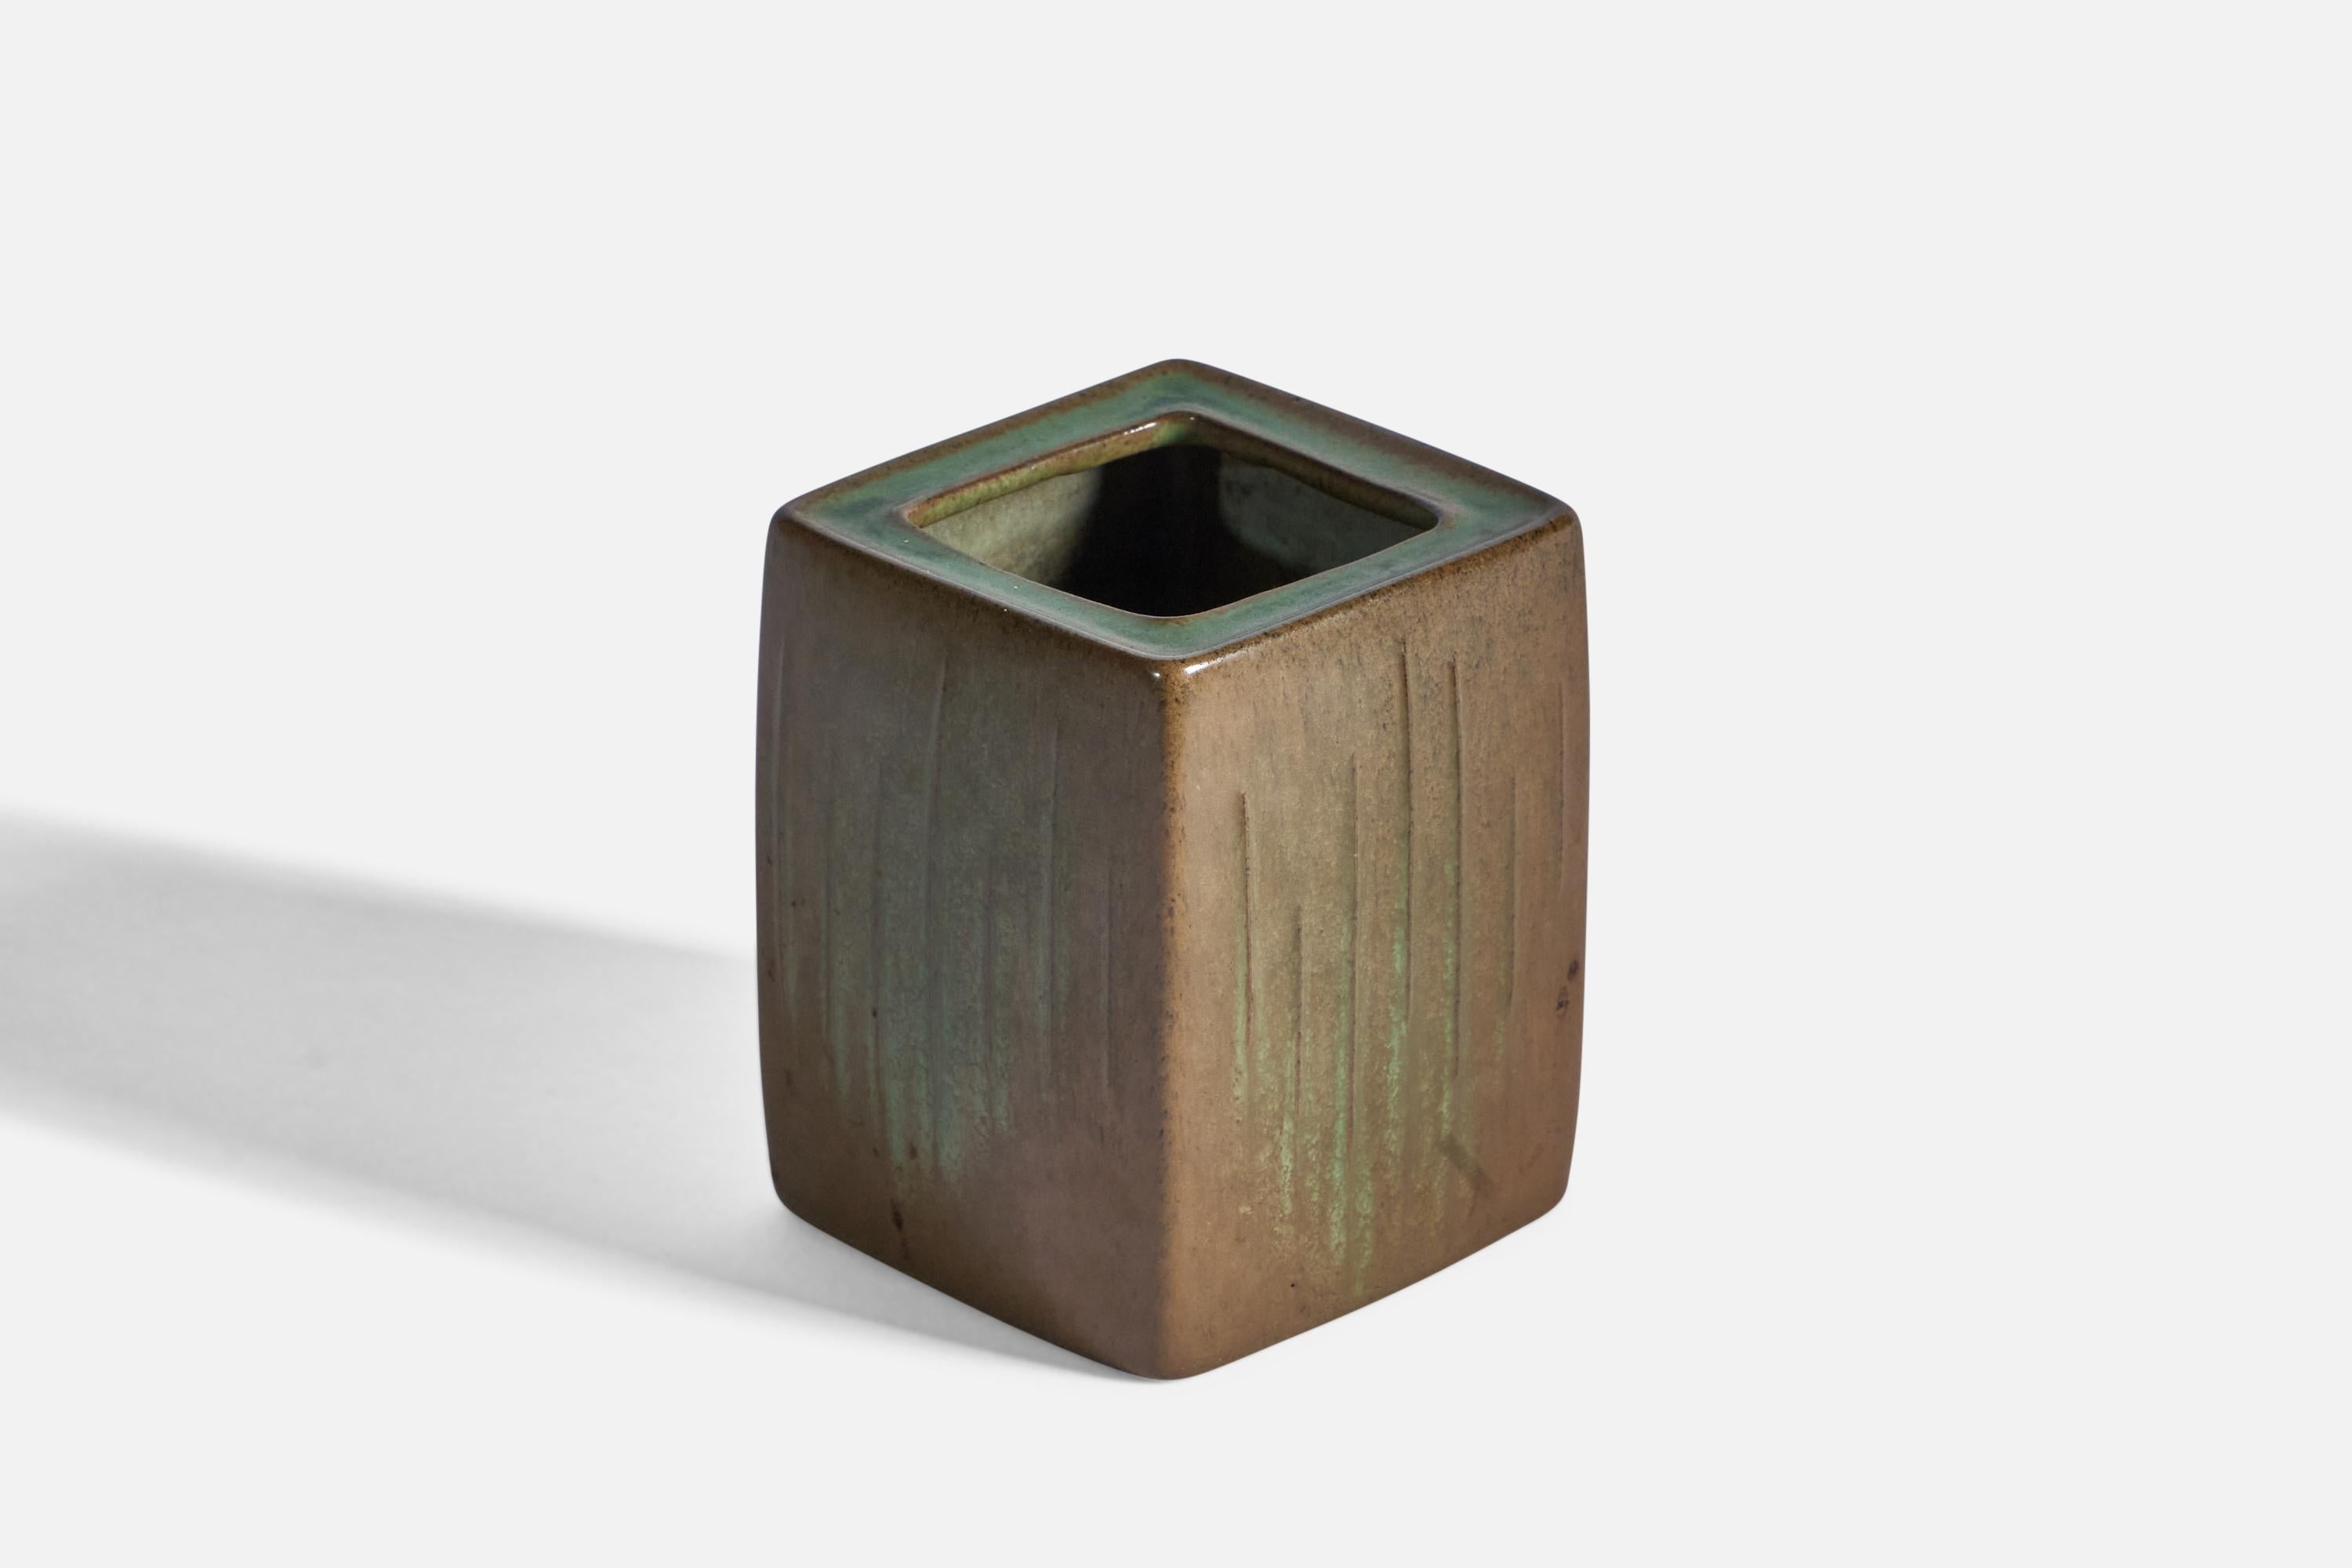 A brown and green-glazed stoneware vase, designed and produced in Denmark, 1960s.